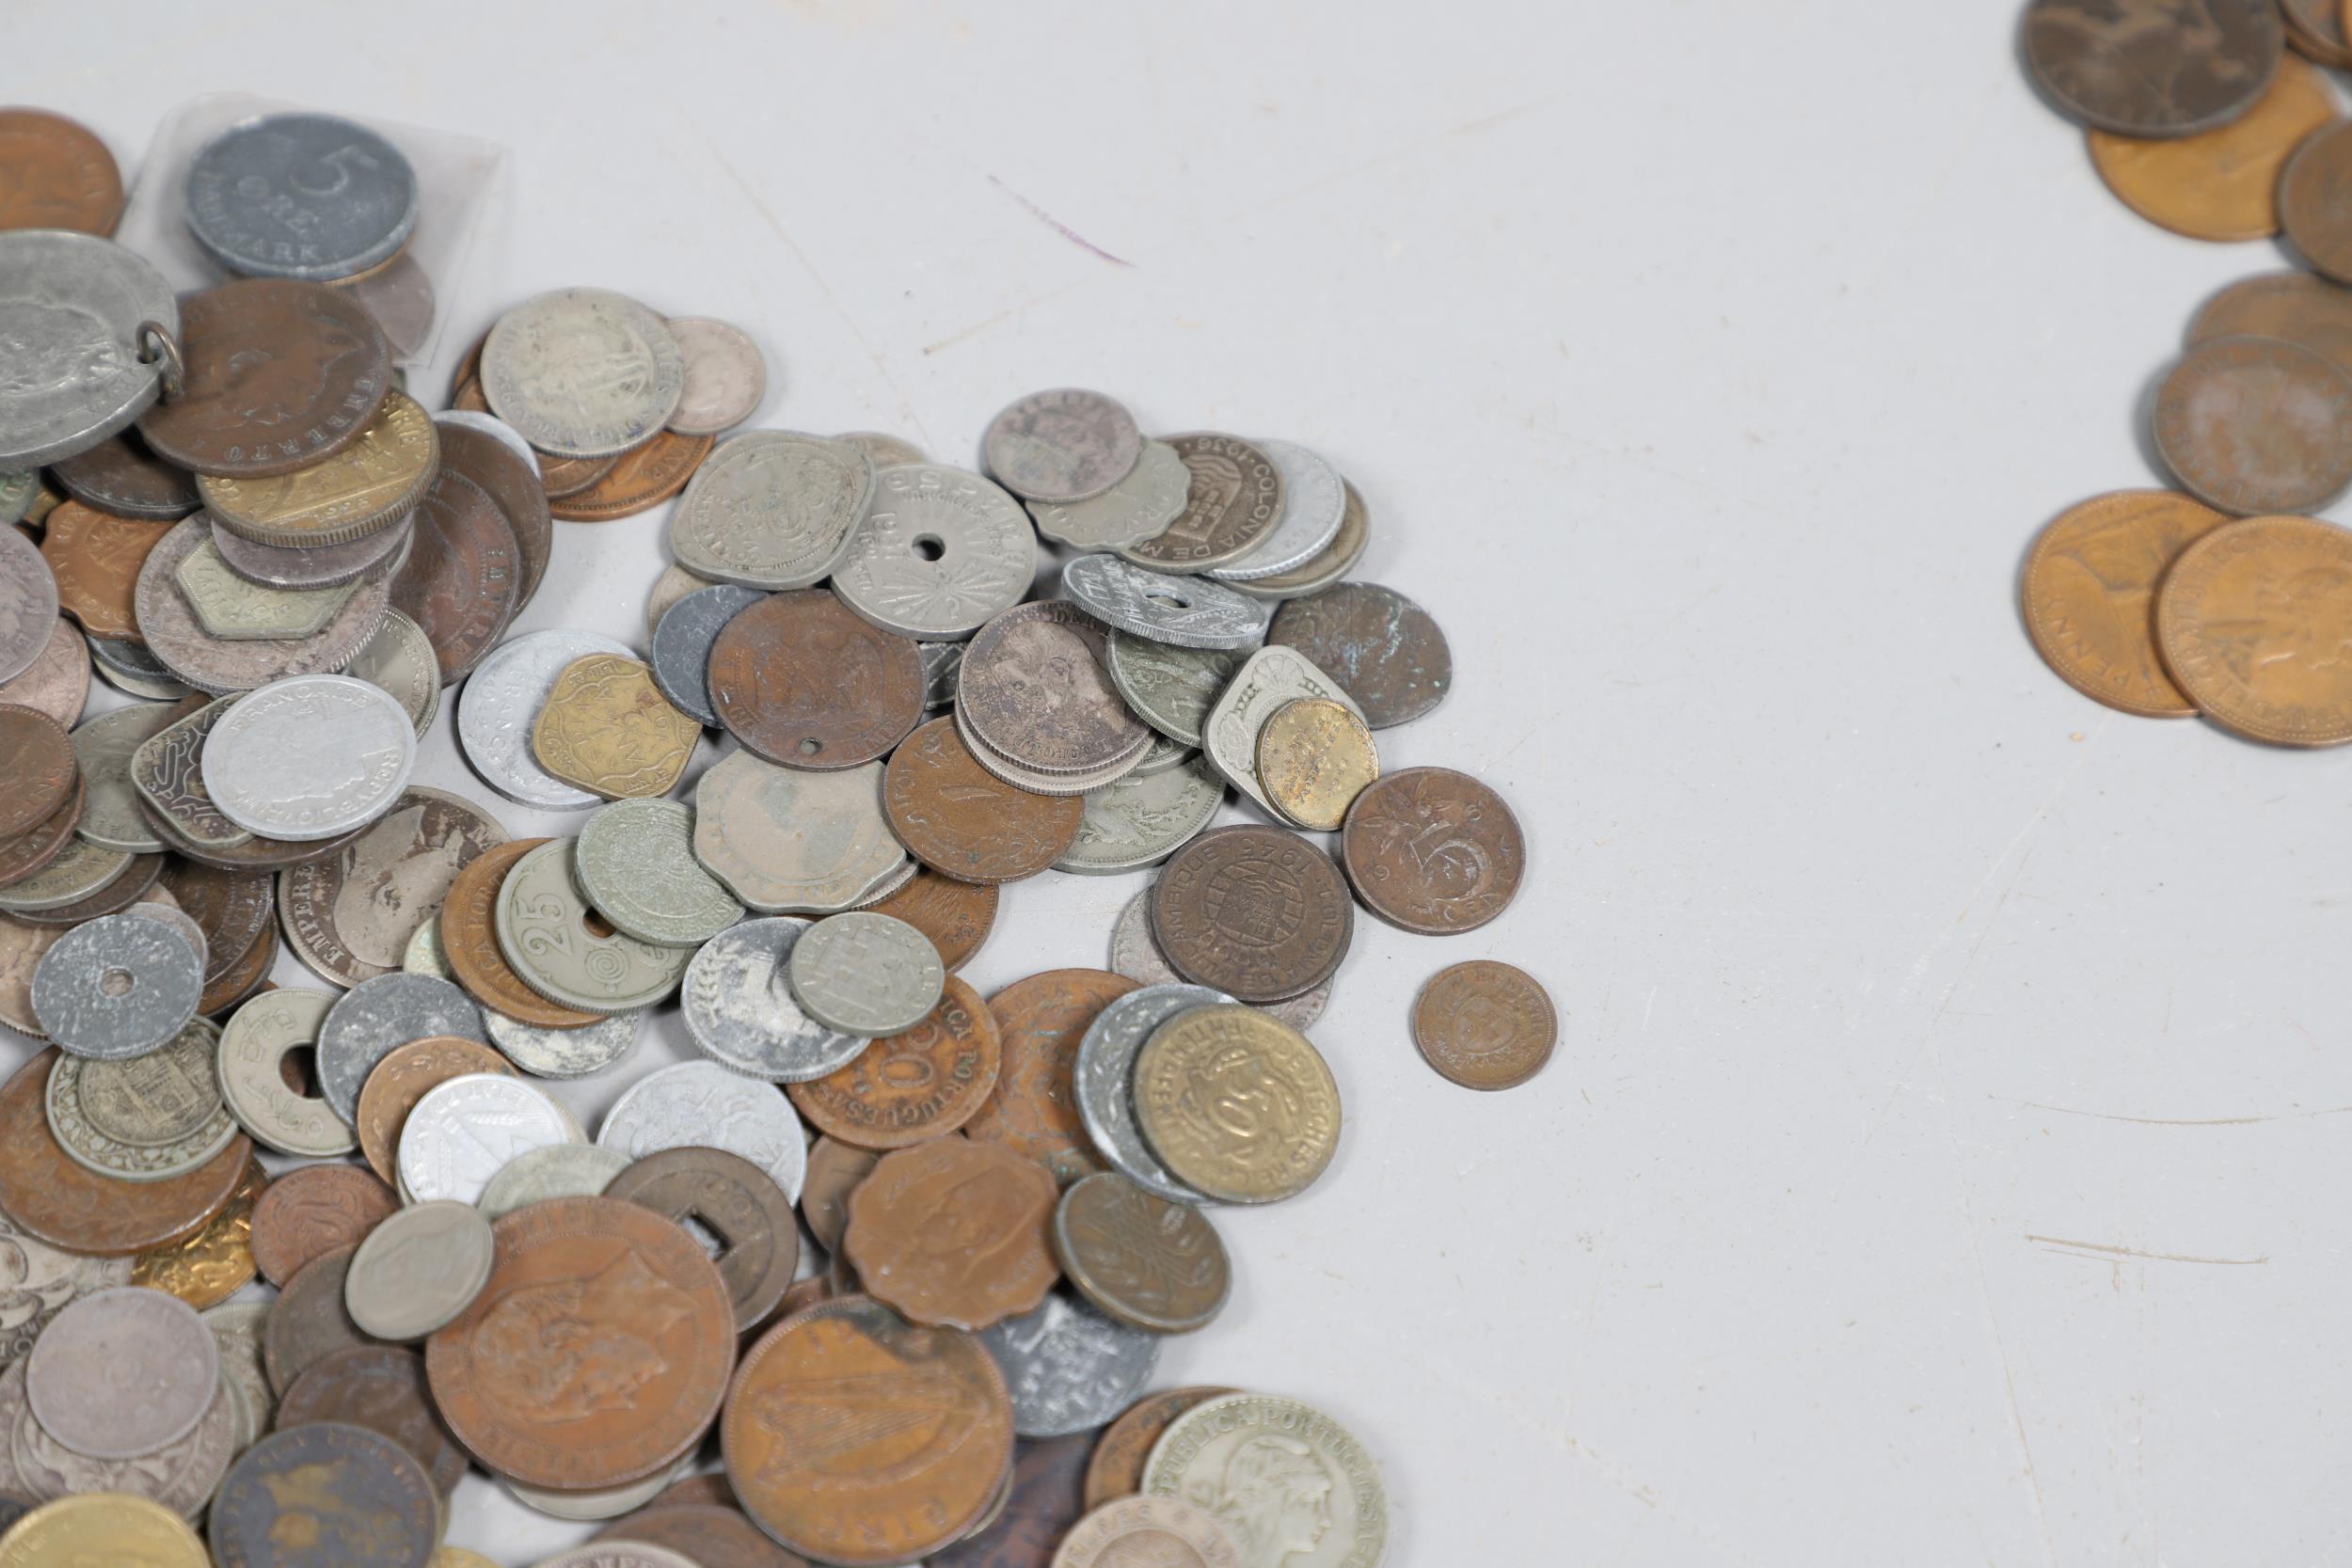 A LARGE COLLECTION OF WORLD COINS AND SIMILAR BRITISH COINS. - Image 11 of 20